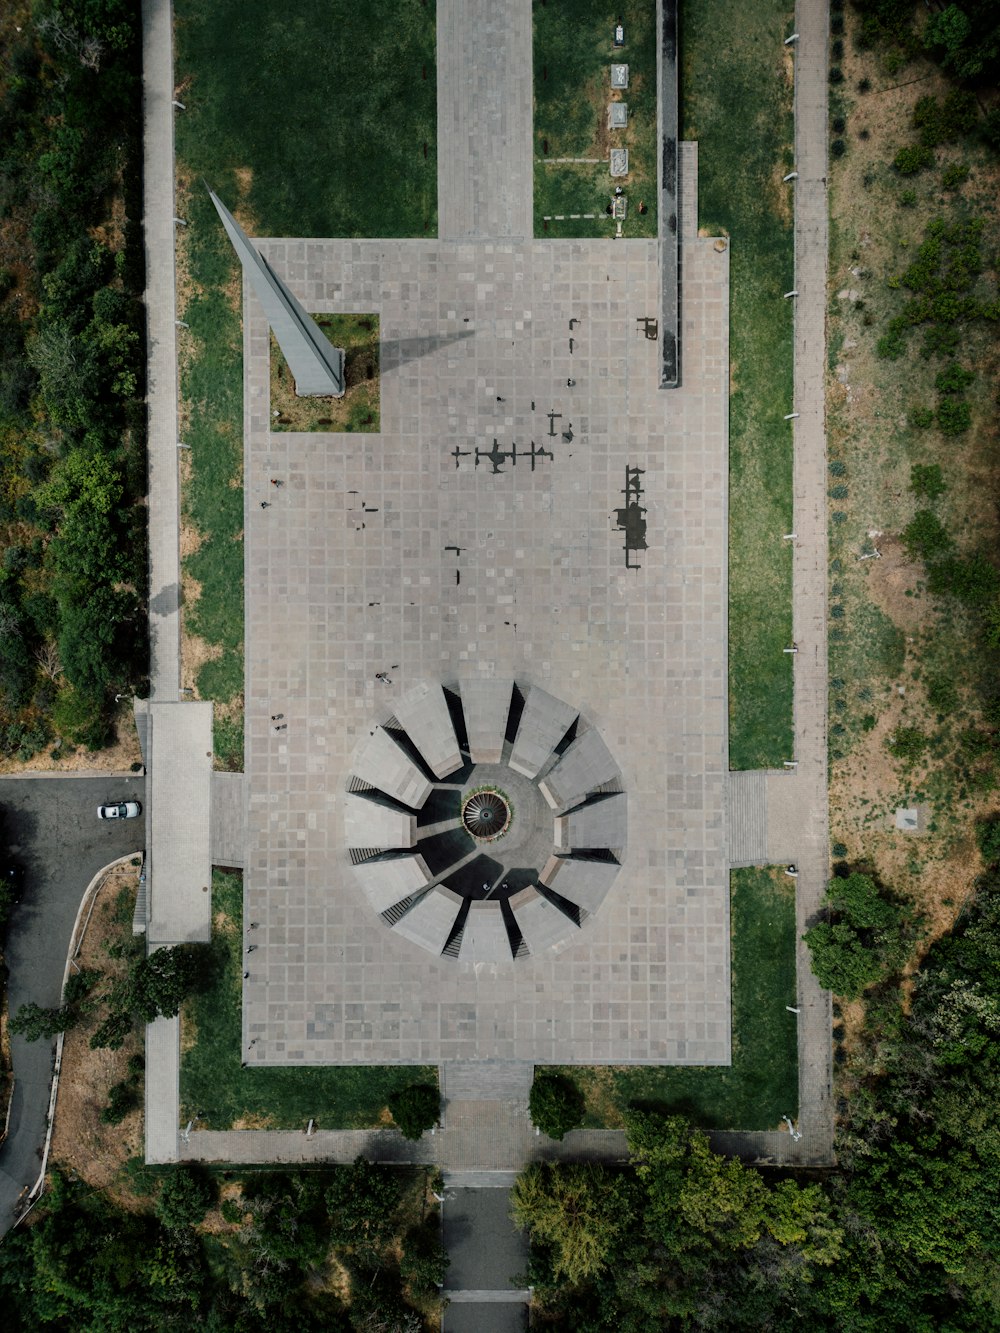 an aerial view of a park with a clock tower